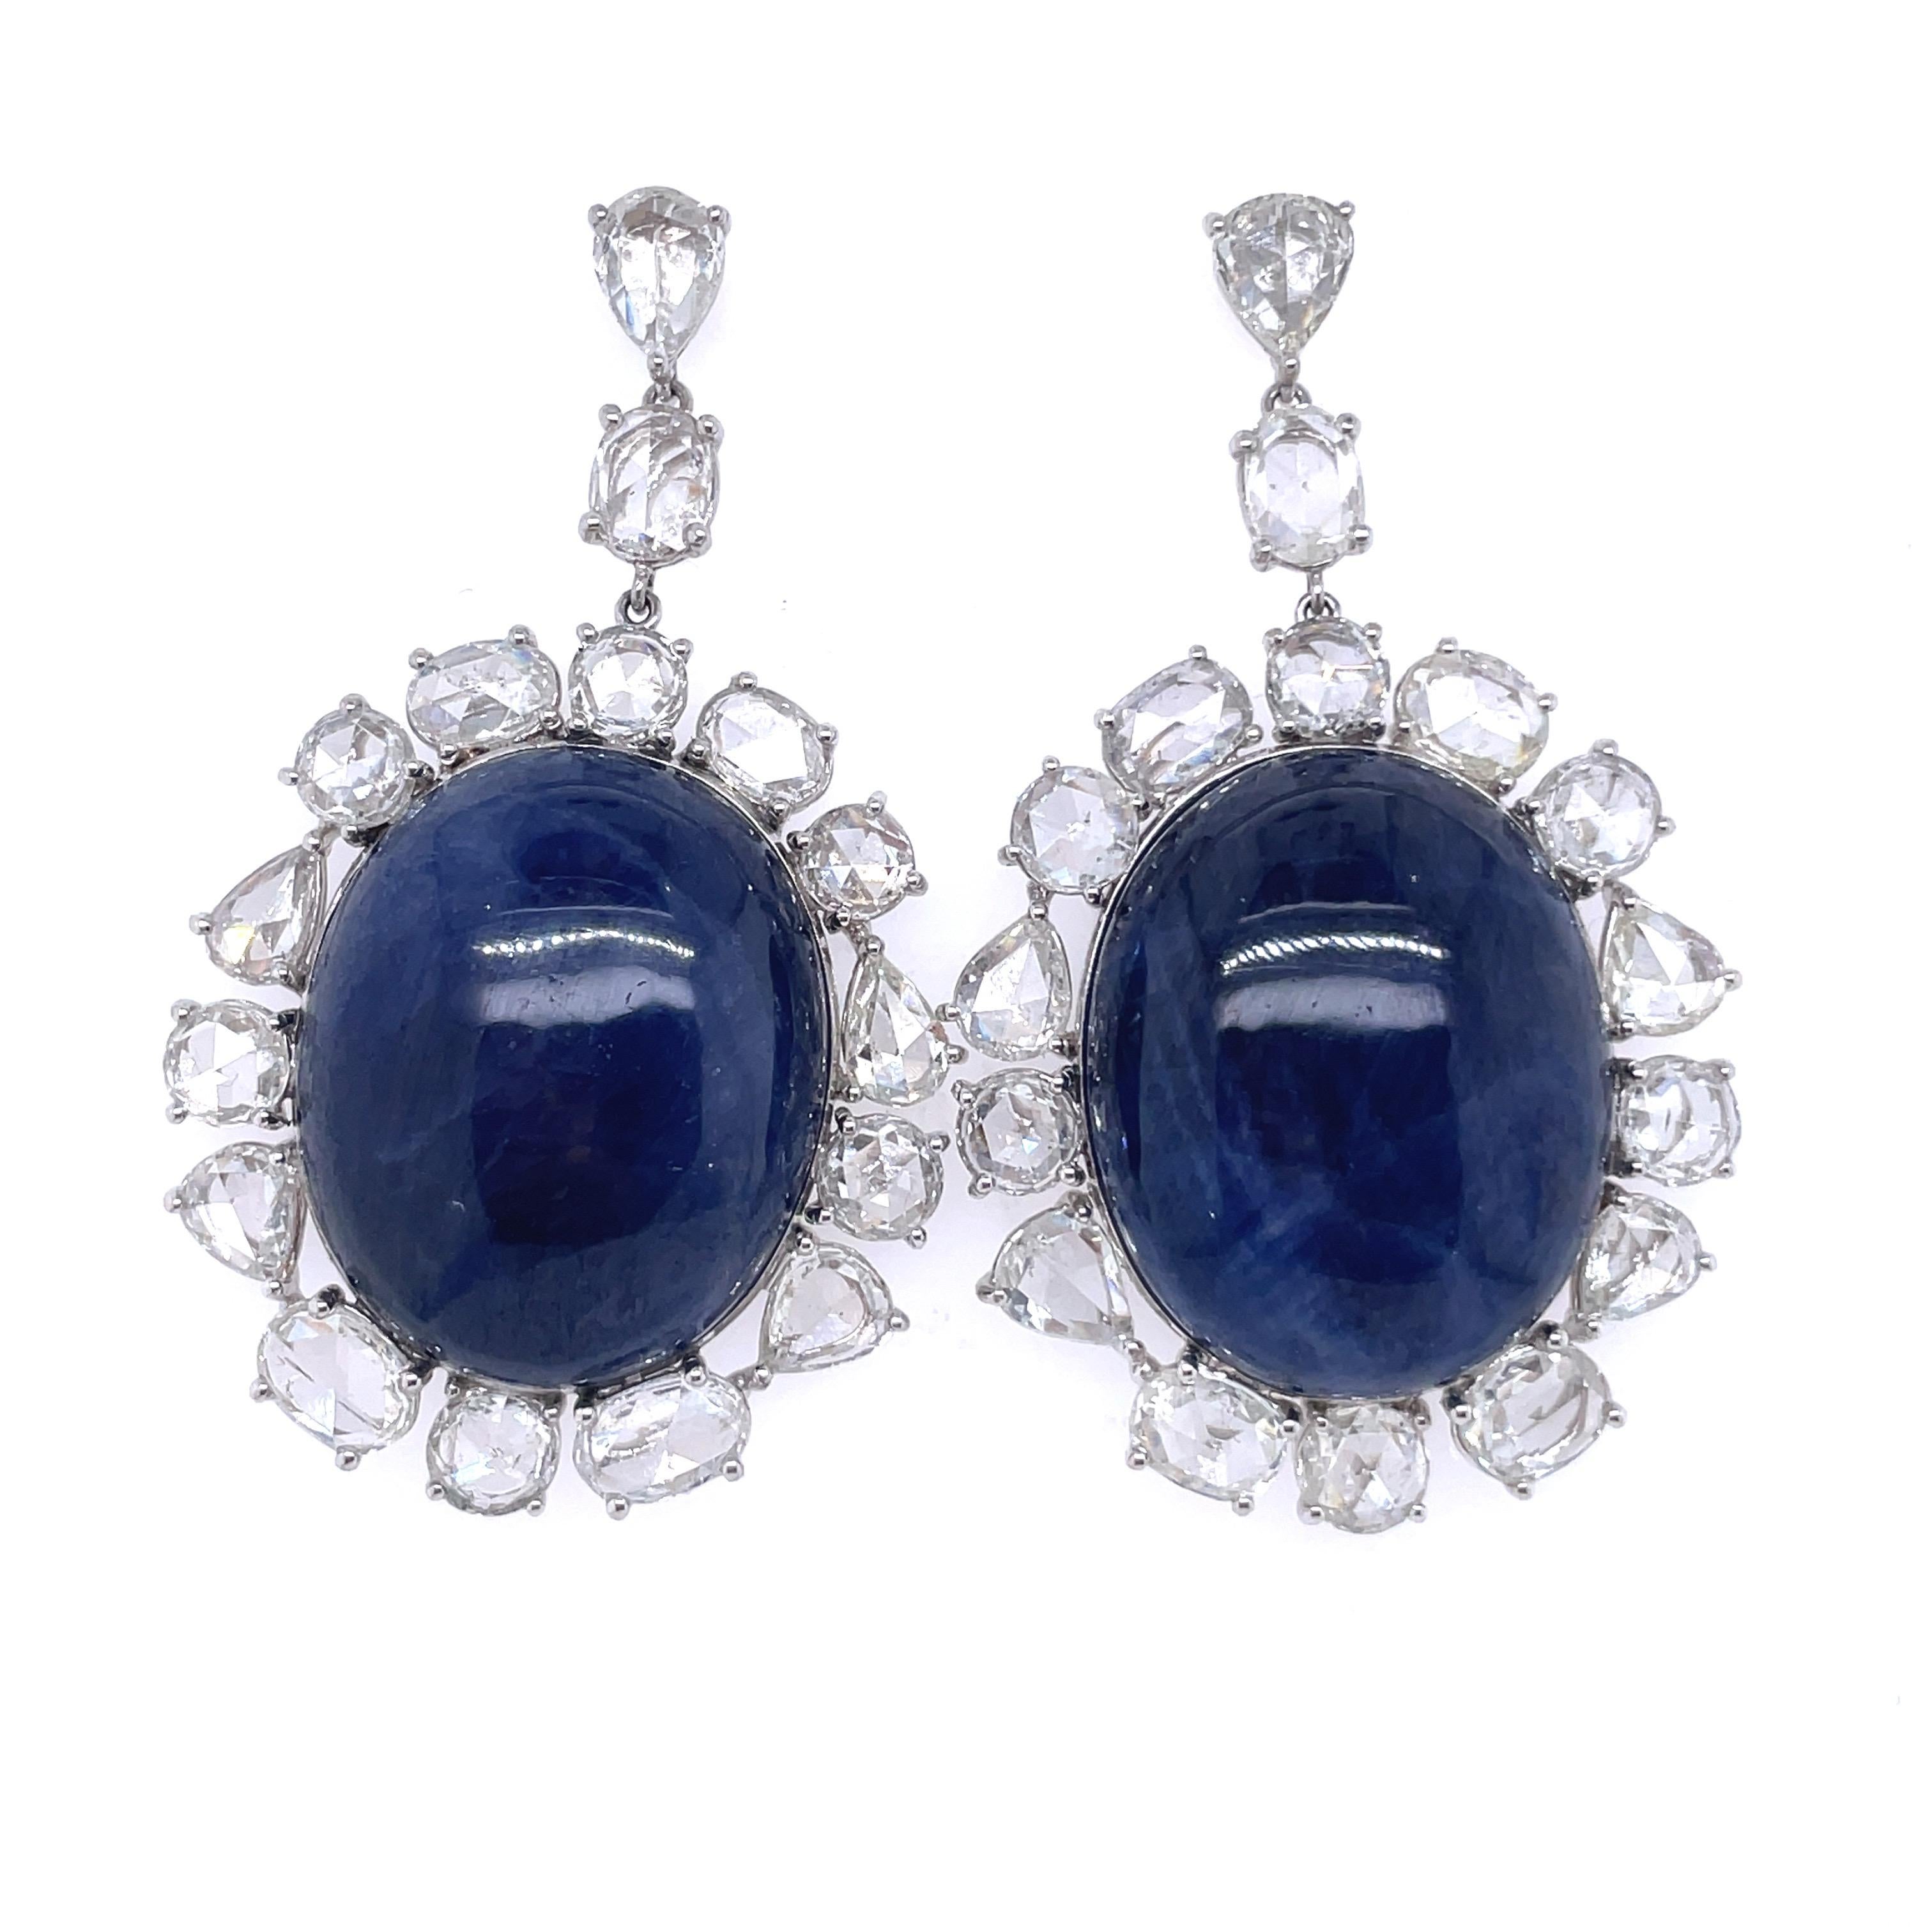 No Heat Burma Blue Cabochon Sapphire Earrings in 18 K  White Gold, Antique Cut  Diamonds and Swiss GRS Certificate

Beautiful set of Natural, no heat, Burma Oval Cabochon Blue Sapphire (146.70 cts) earrings of ideal color with a surround of Antique